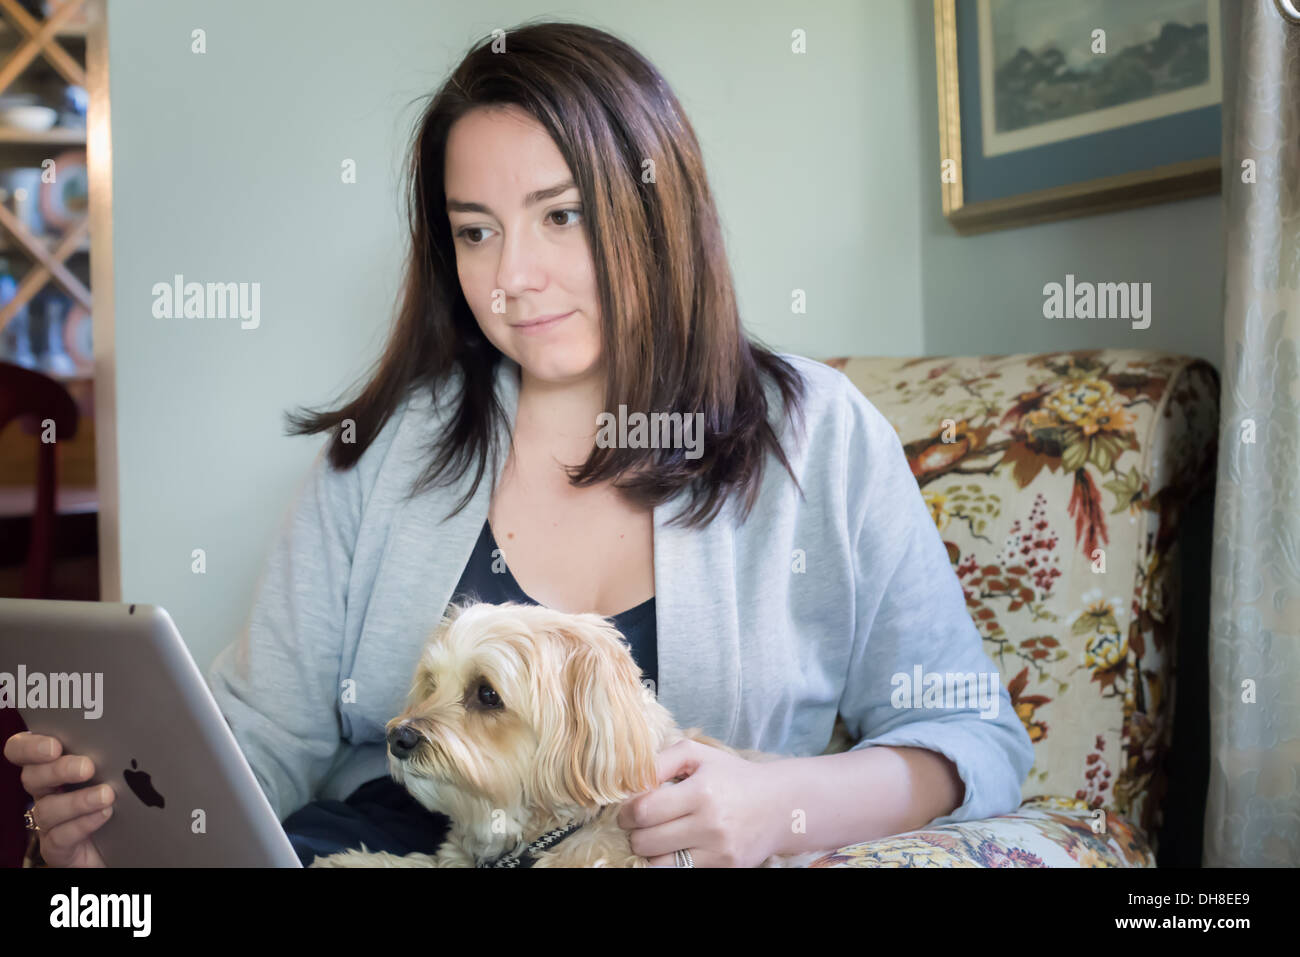 I Pad  and Woman reading with a  small mixed breed dog  in a home setting. Stock Photo